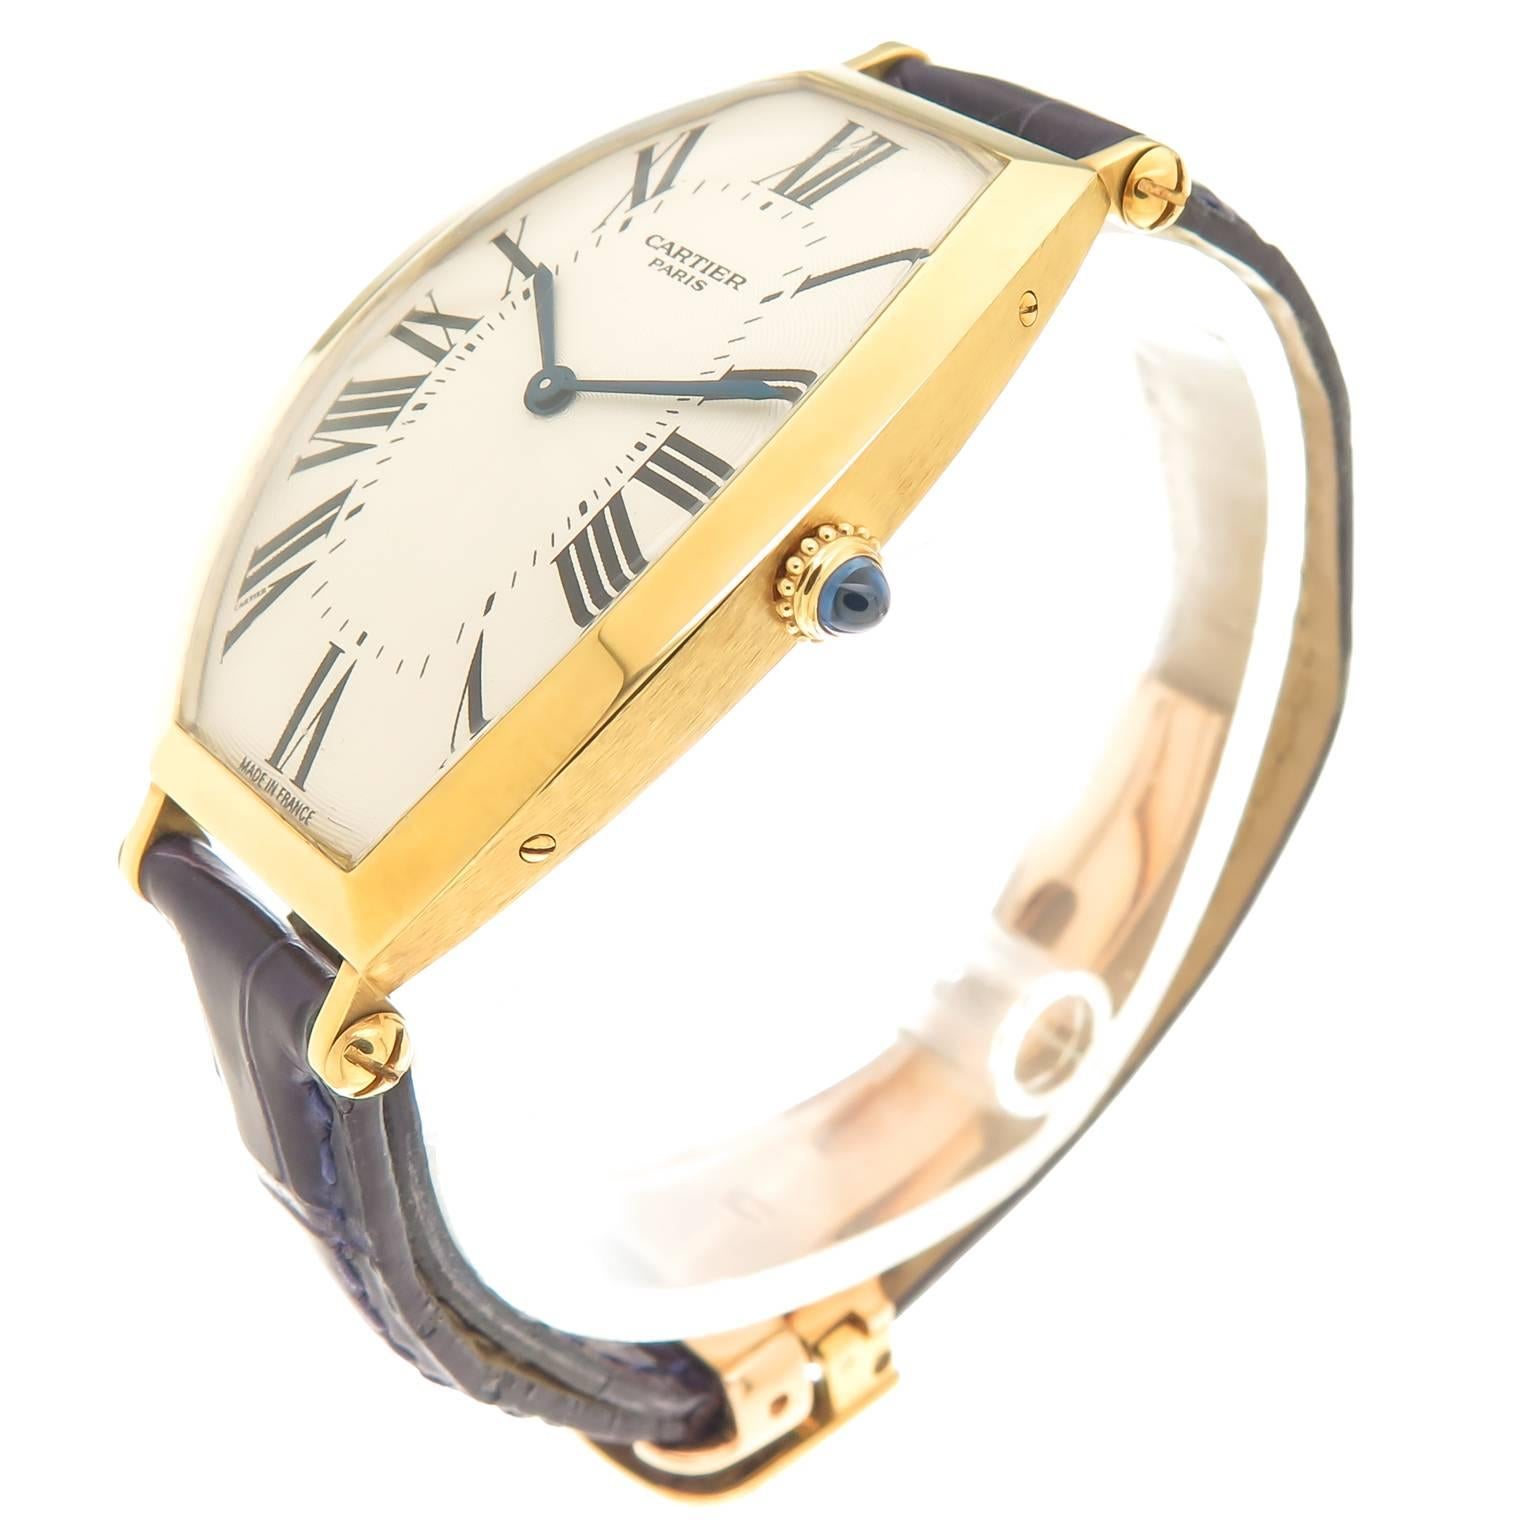 Circa 2000 Cartier Tonneau Wrist watch, 18K Yellow Gold Water resistant case measuring 45 X 25 MM. Mechanical, manual wind movement. Silvered, engine turned, Guilloche dial with Black Roman Numerals and a Sapphire crown. Original Cartier Purple